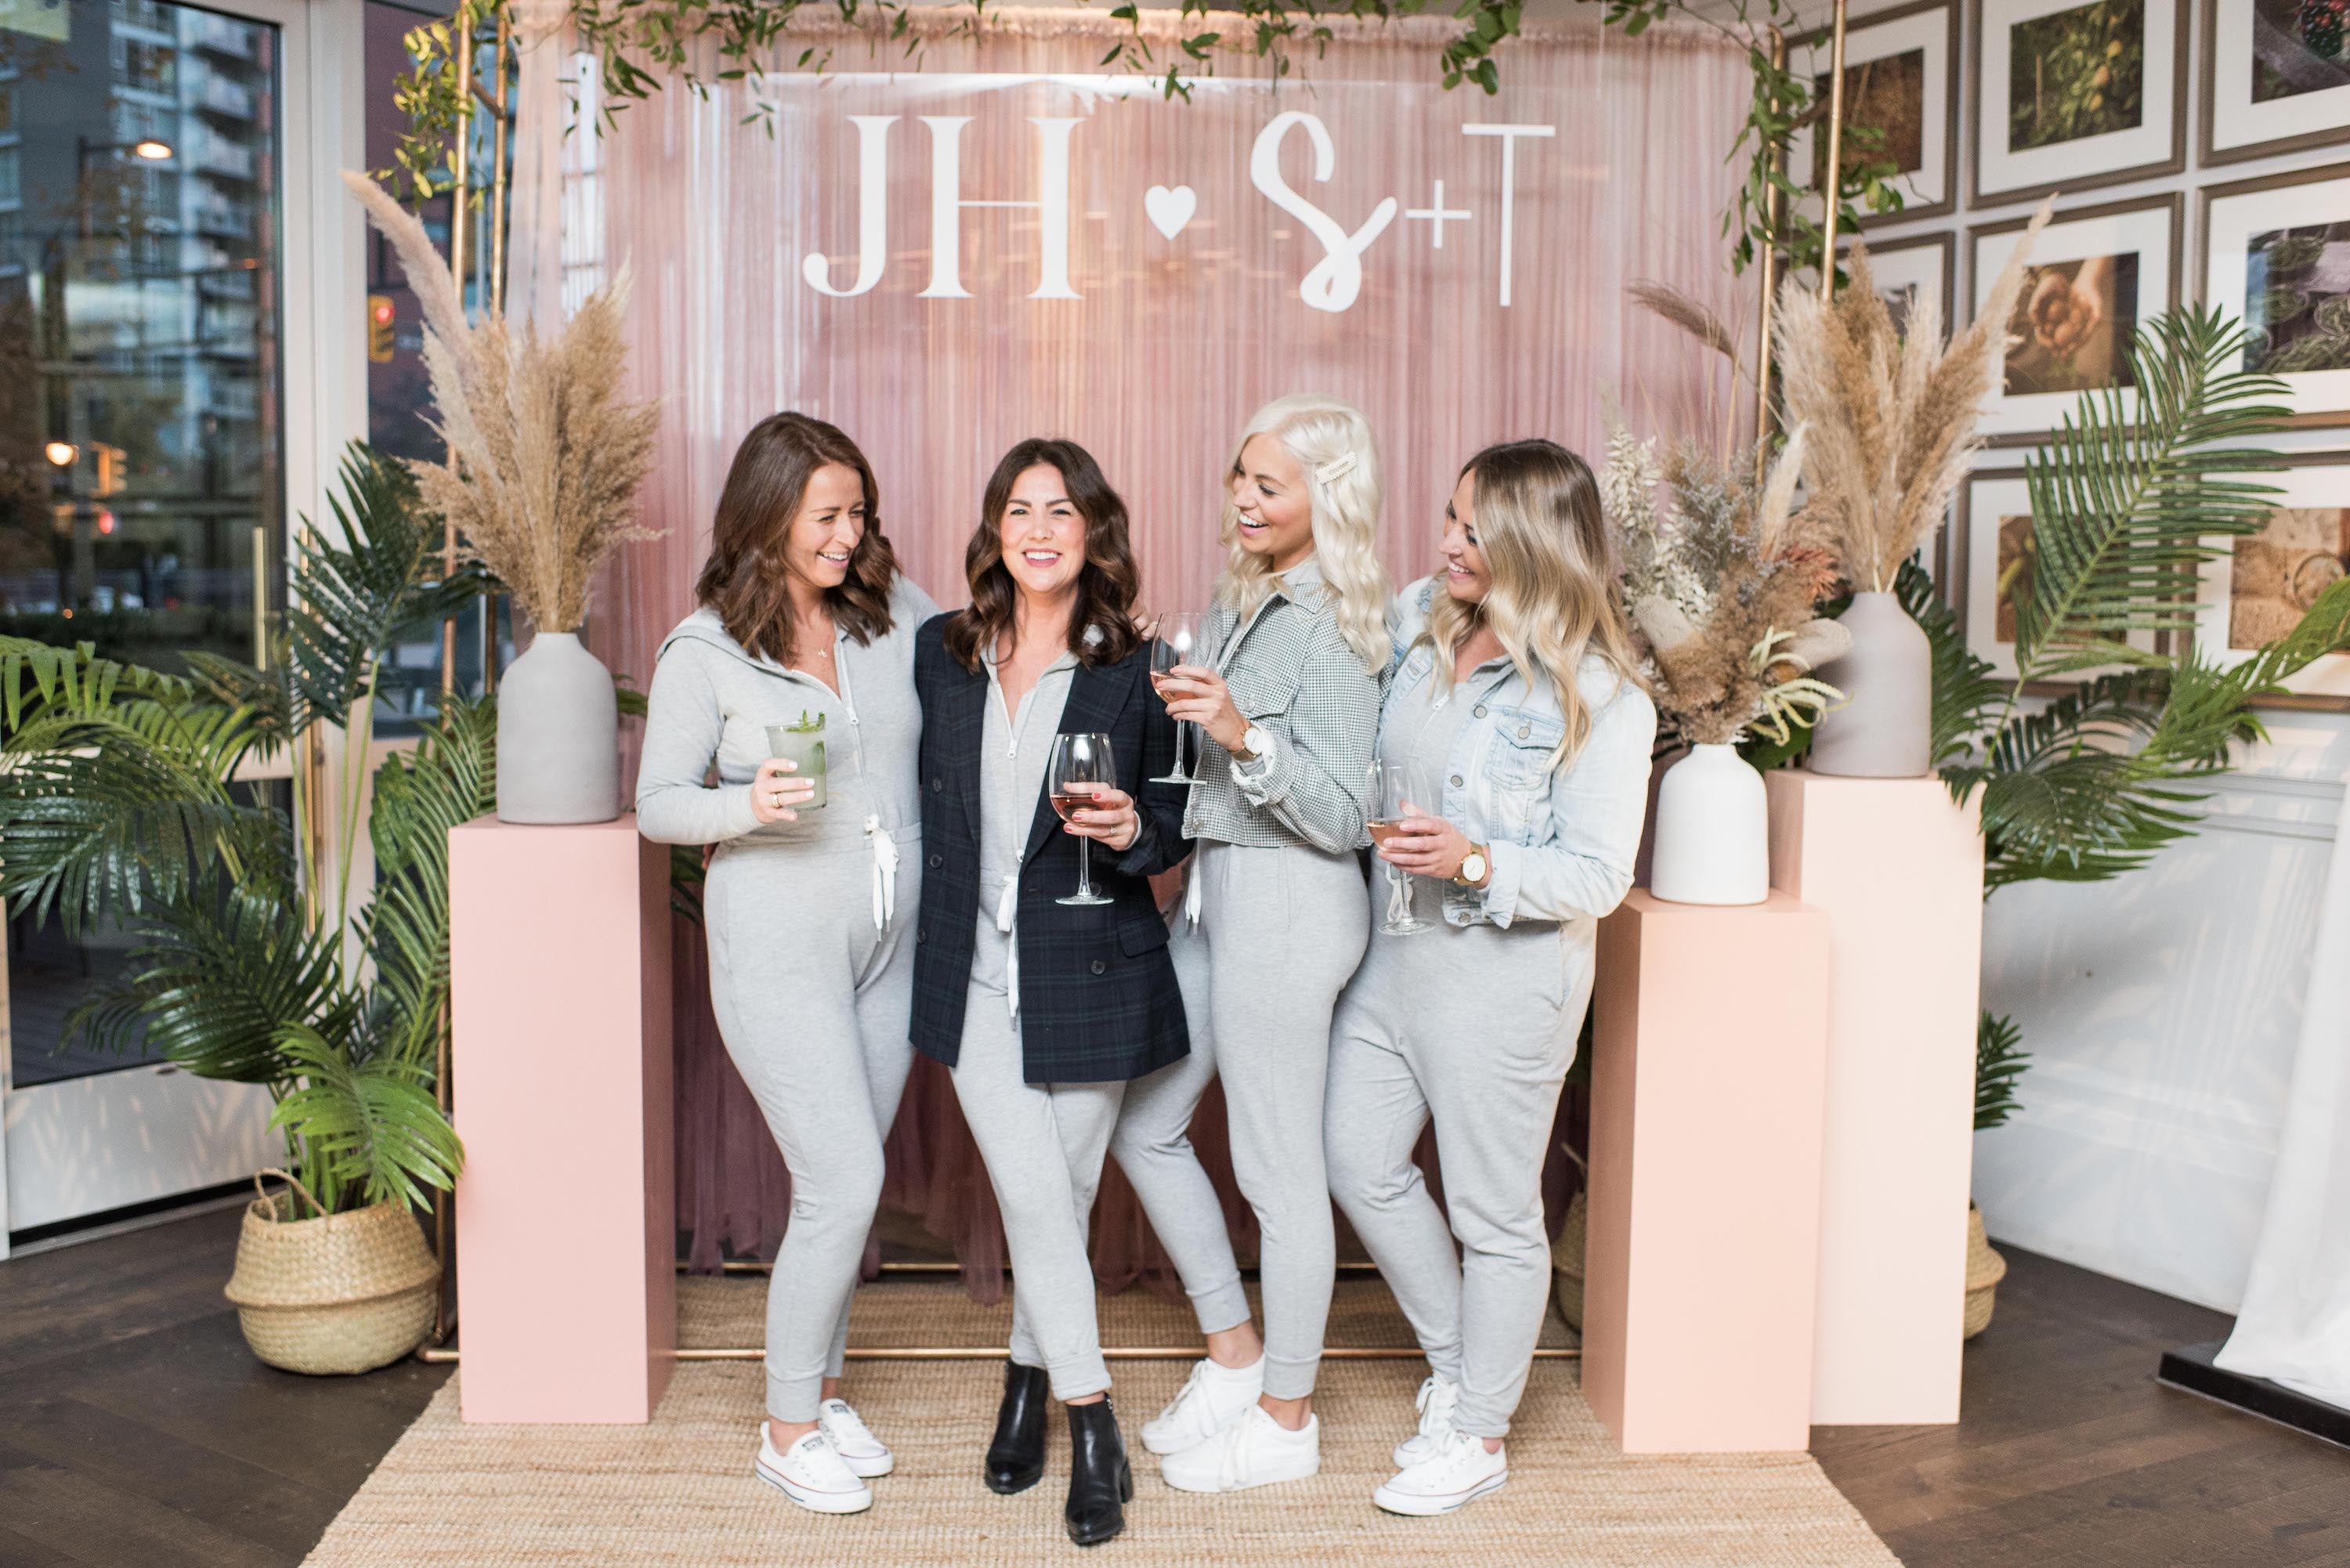 HIGHLIGHTS FROM THE JILLIAN HARRIS X SMASH + TESS COLLECTION LAUNCH EVENT